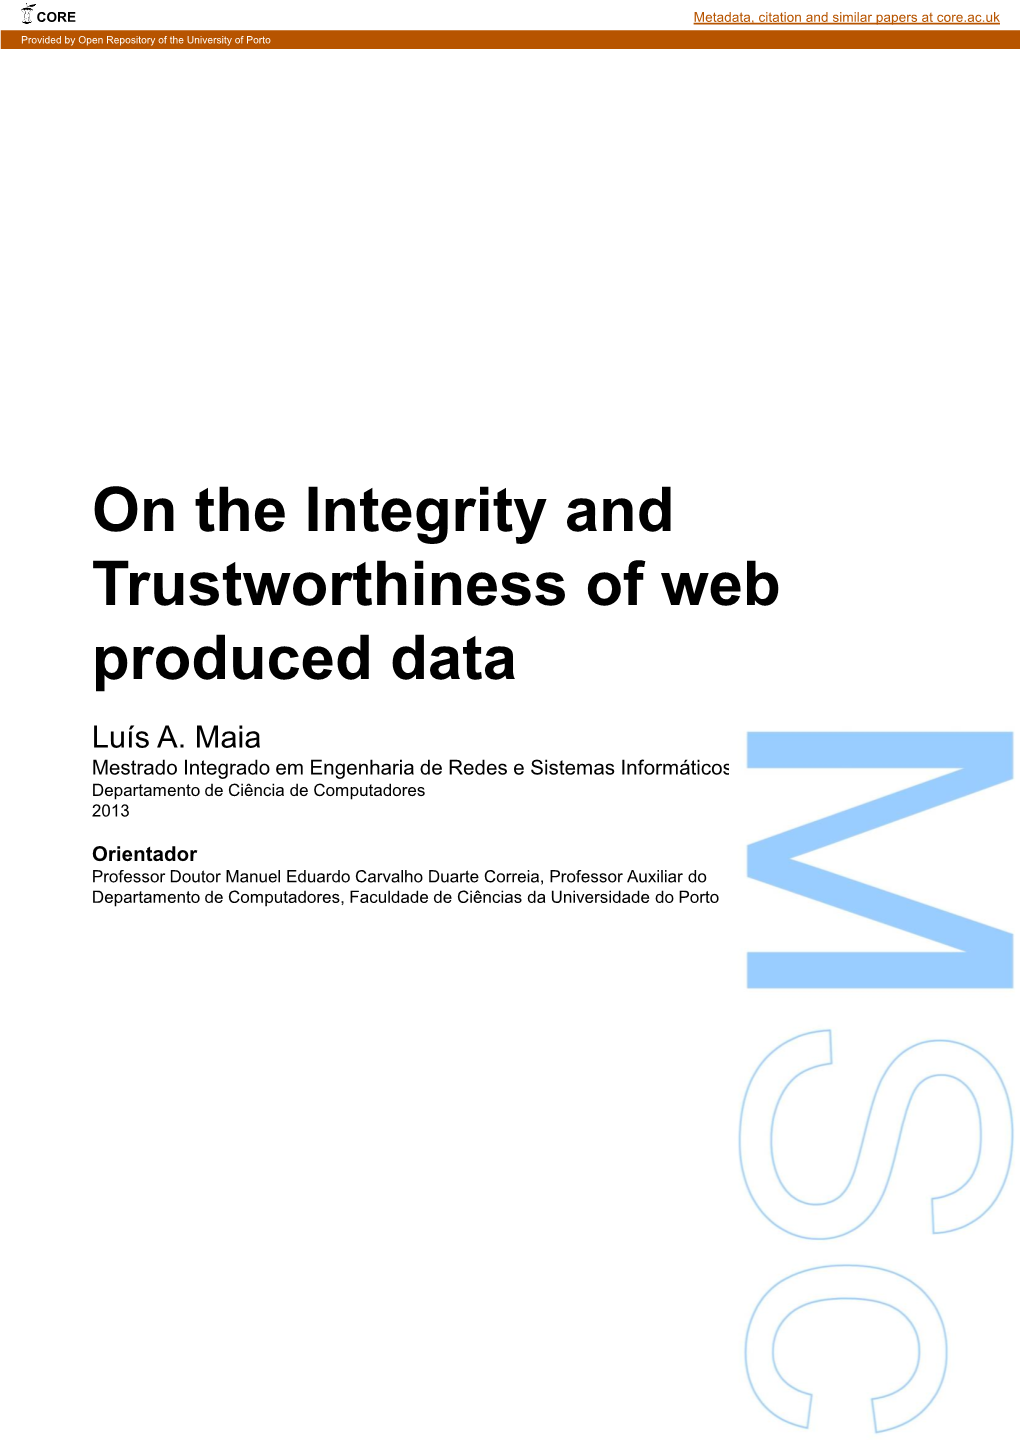 On the Integrity and Trustworthiness of Web Produced Data